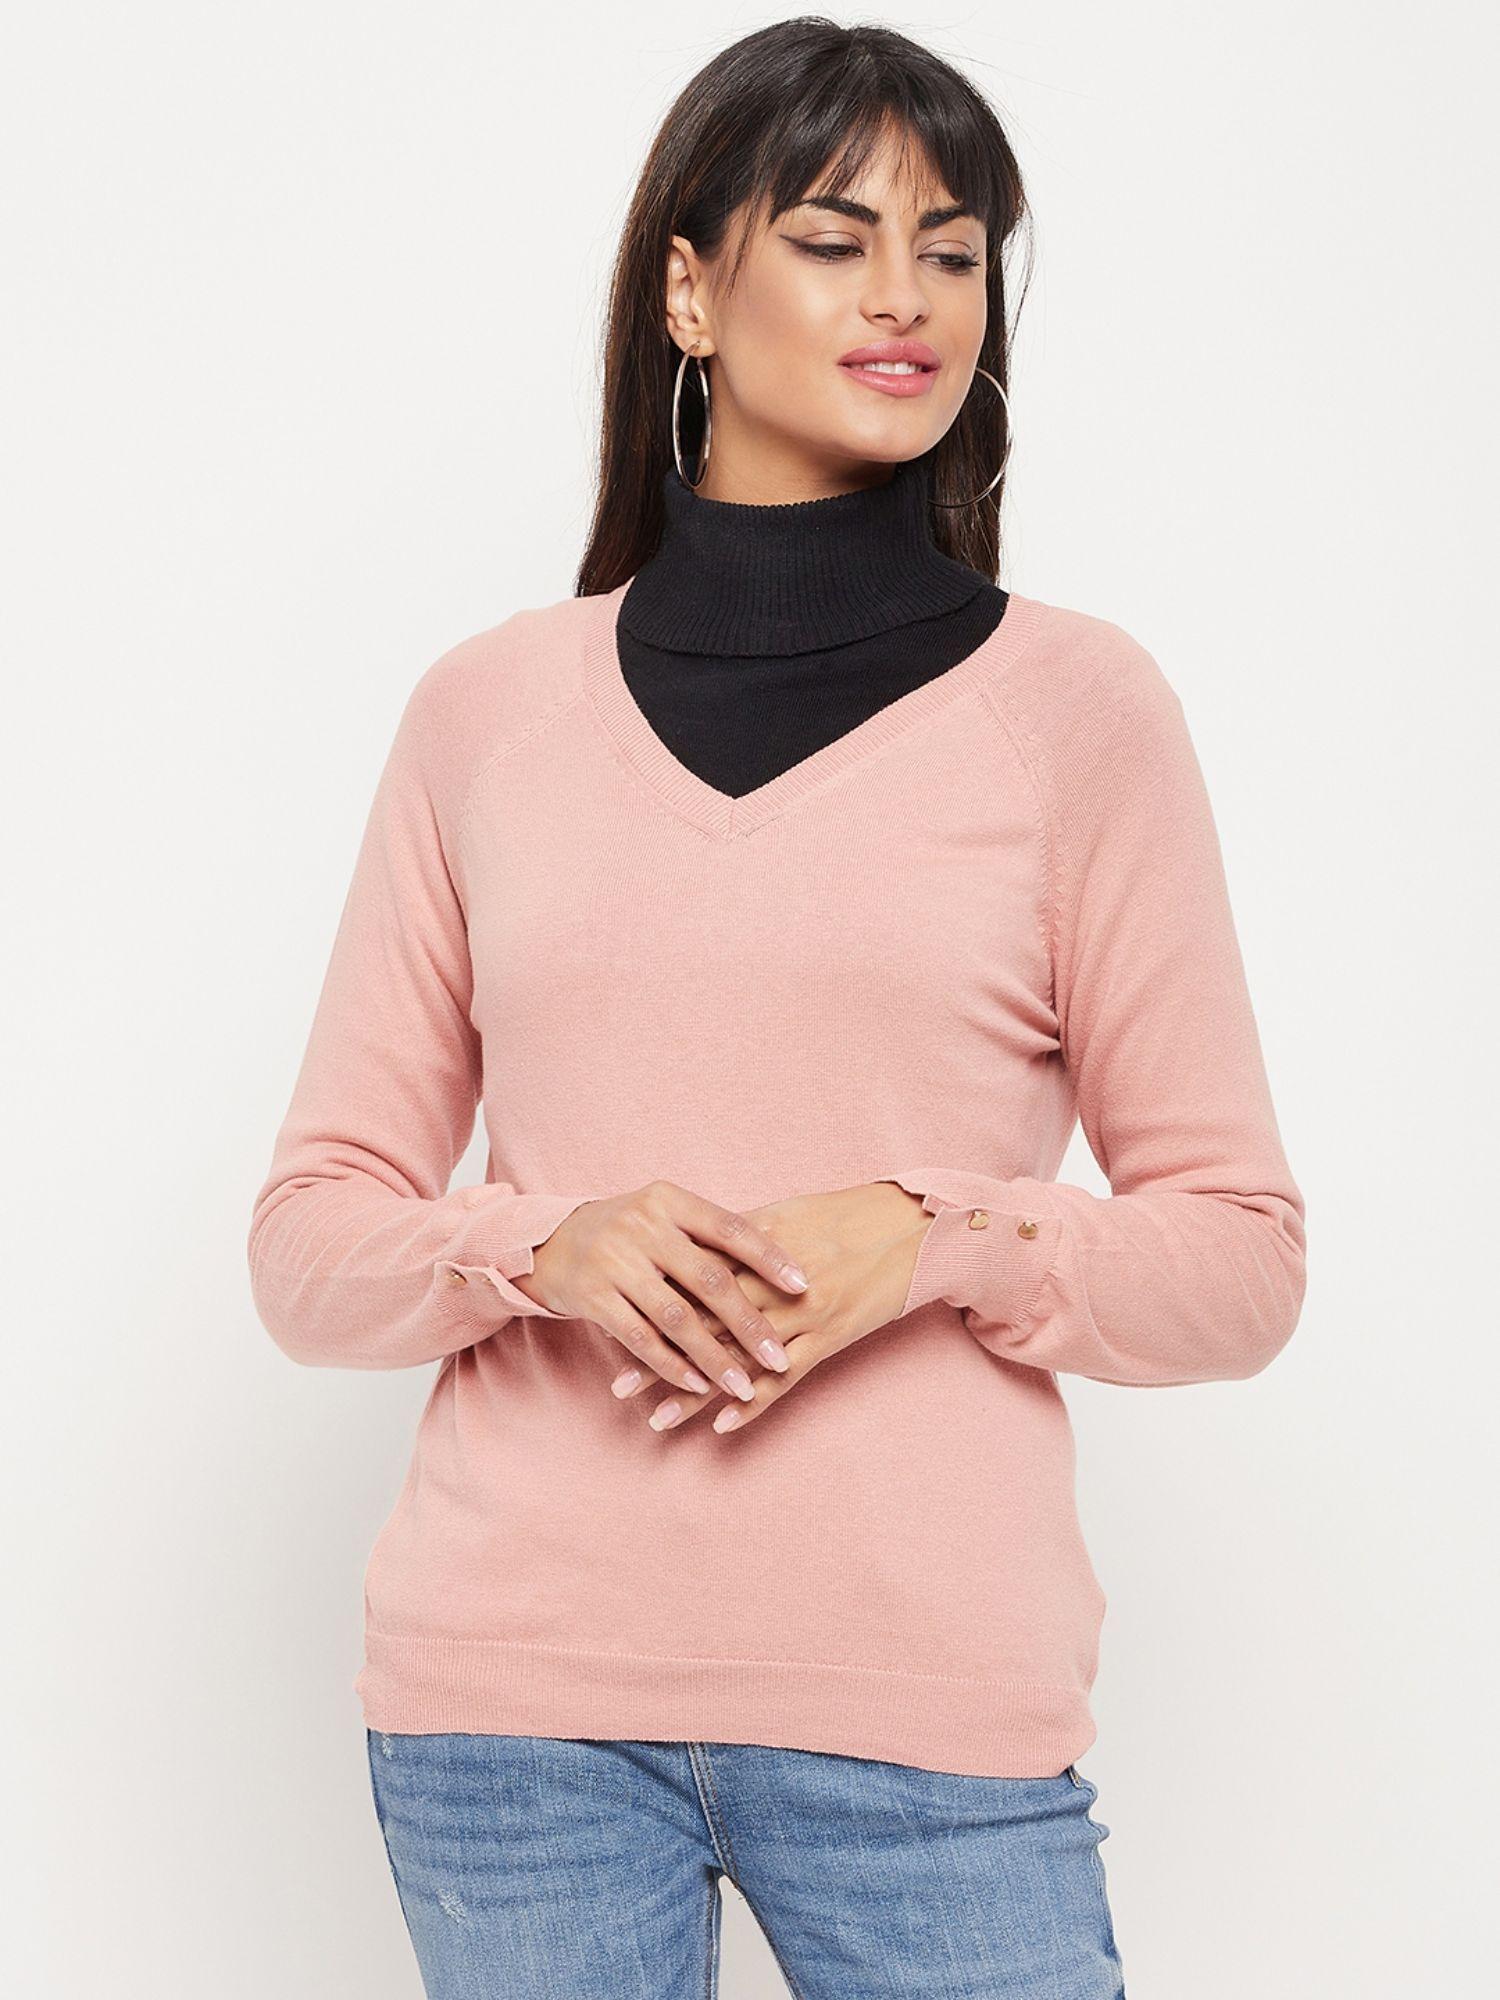 solid-peach-sweater